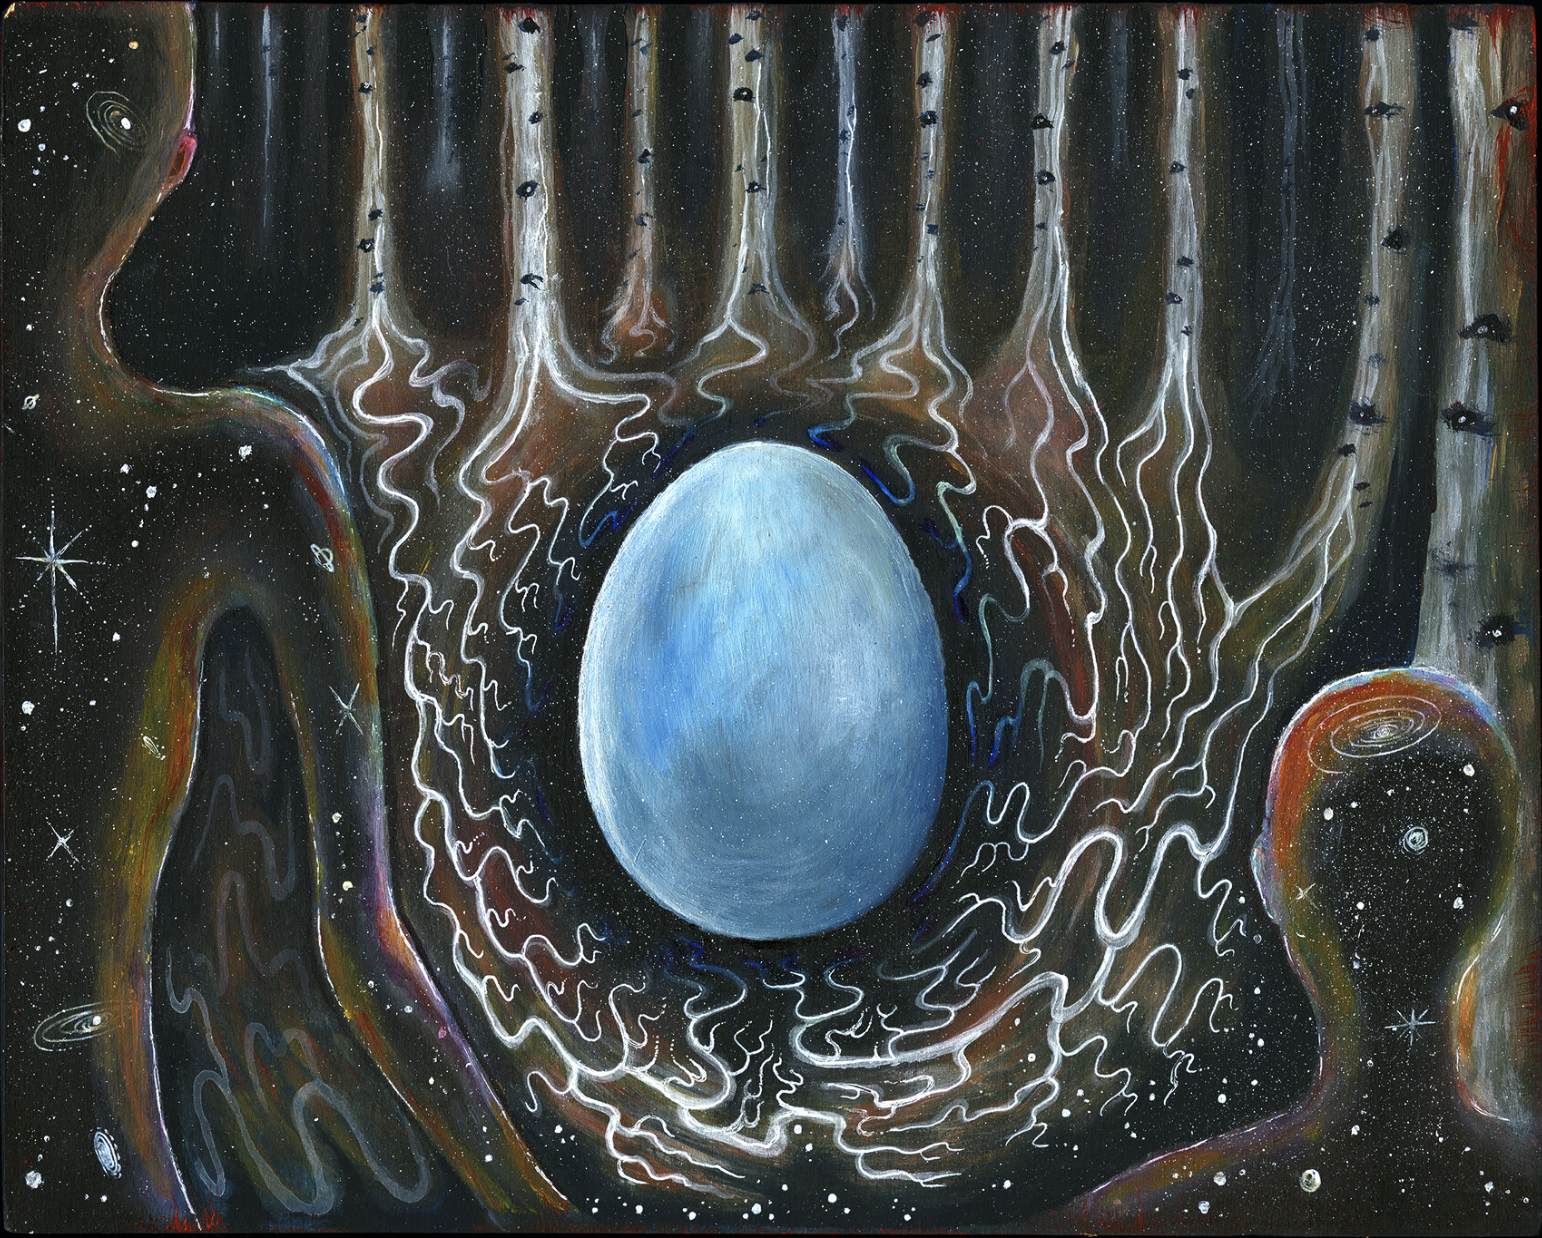  Acrylics and alcohol markers on wood.  Part 1 of a mysterious narrative involving two cosmic beings and a psychedelic egg inside of a deep dark forest. 